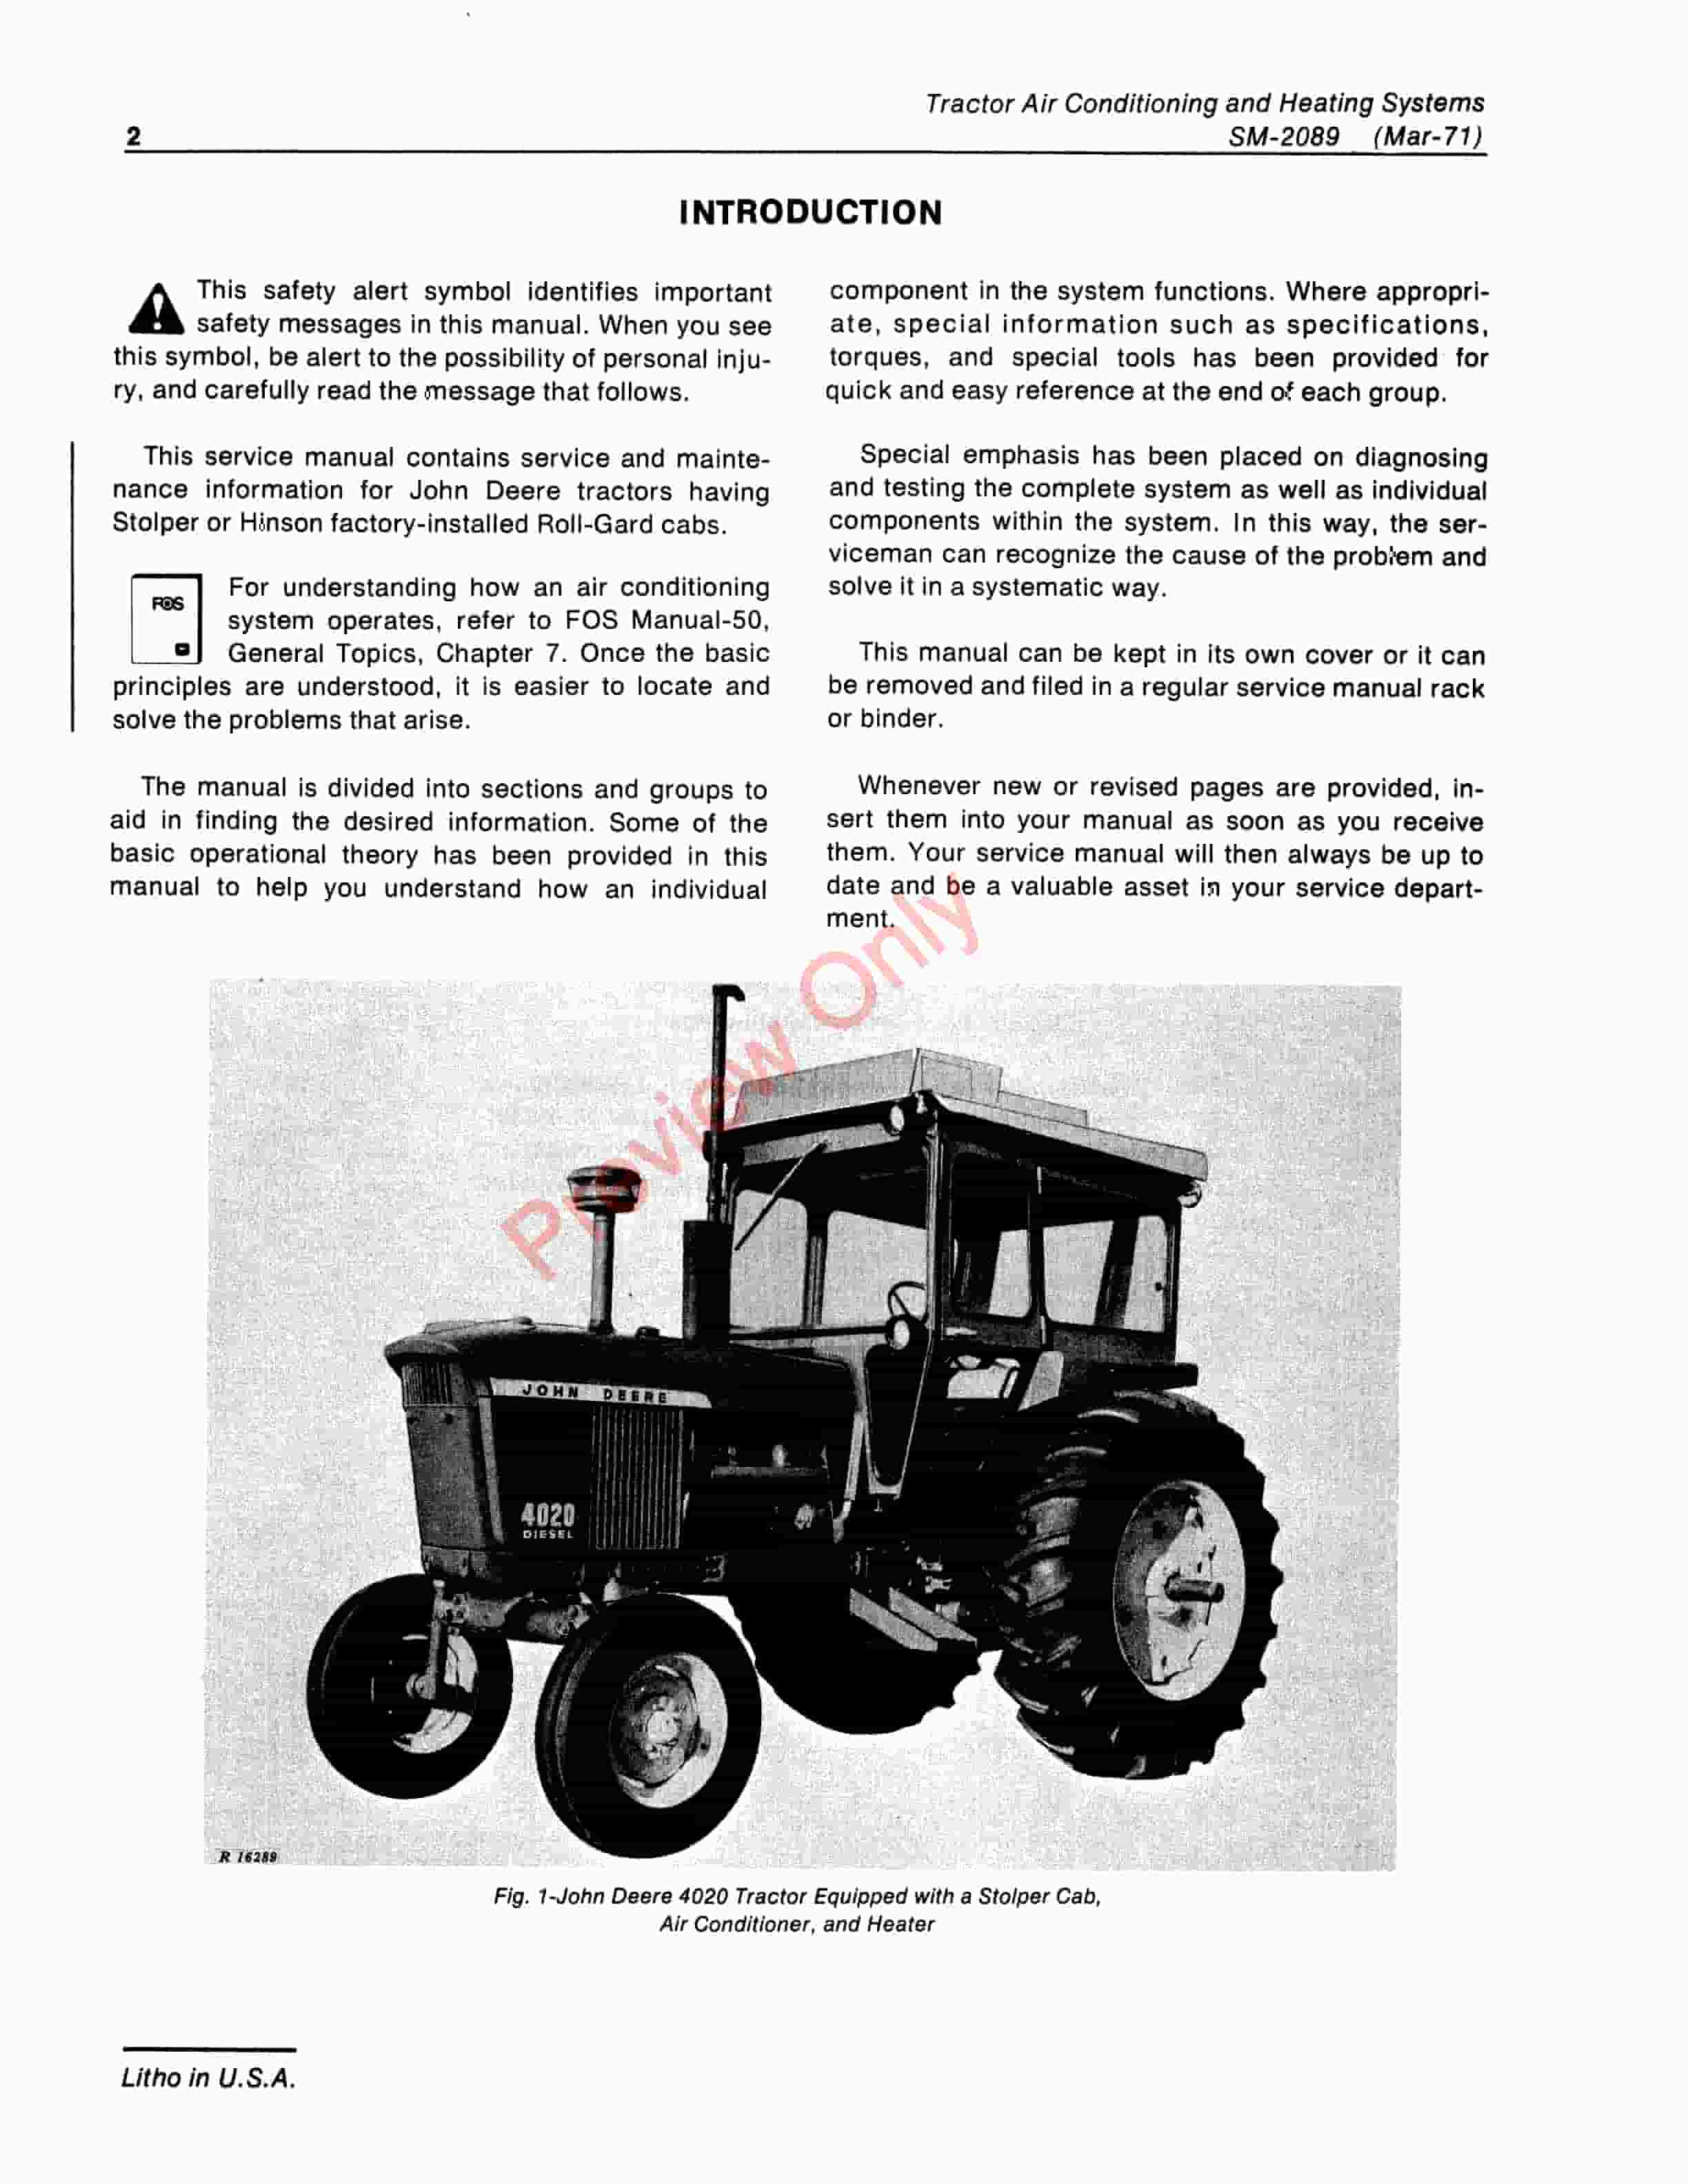 John Deere Tractor Air Conditioner And Heating Systems Service Manual SM2089 01MAR71 4